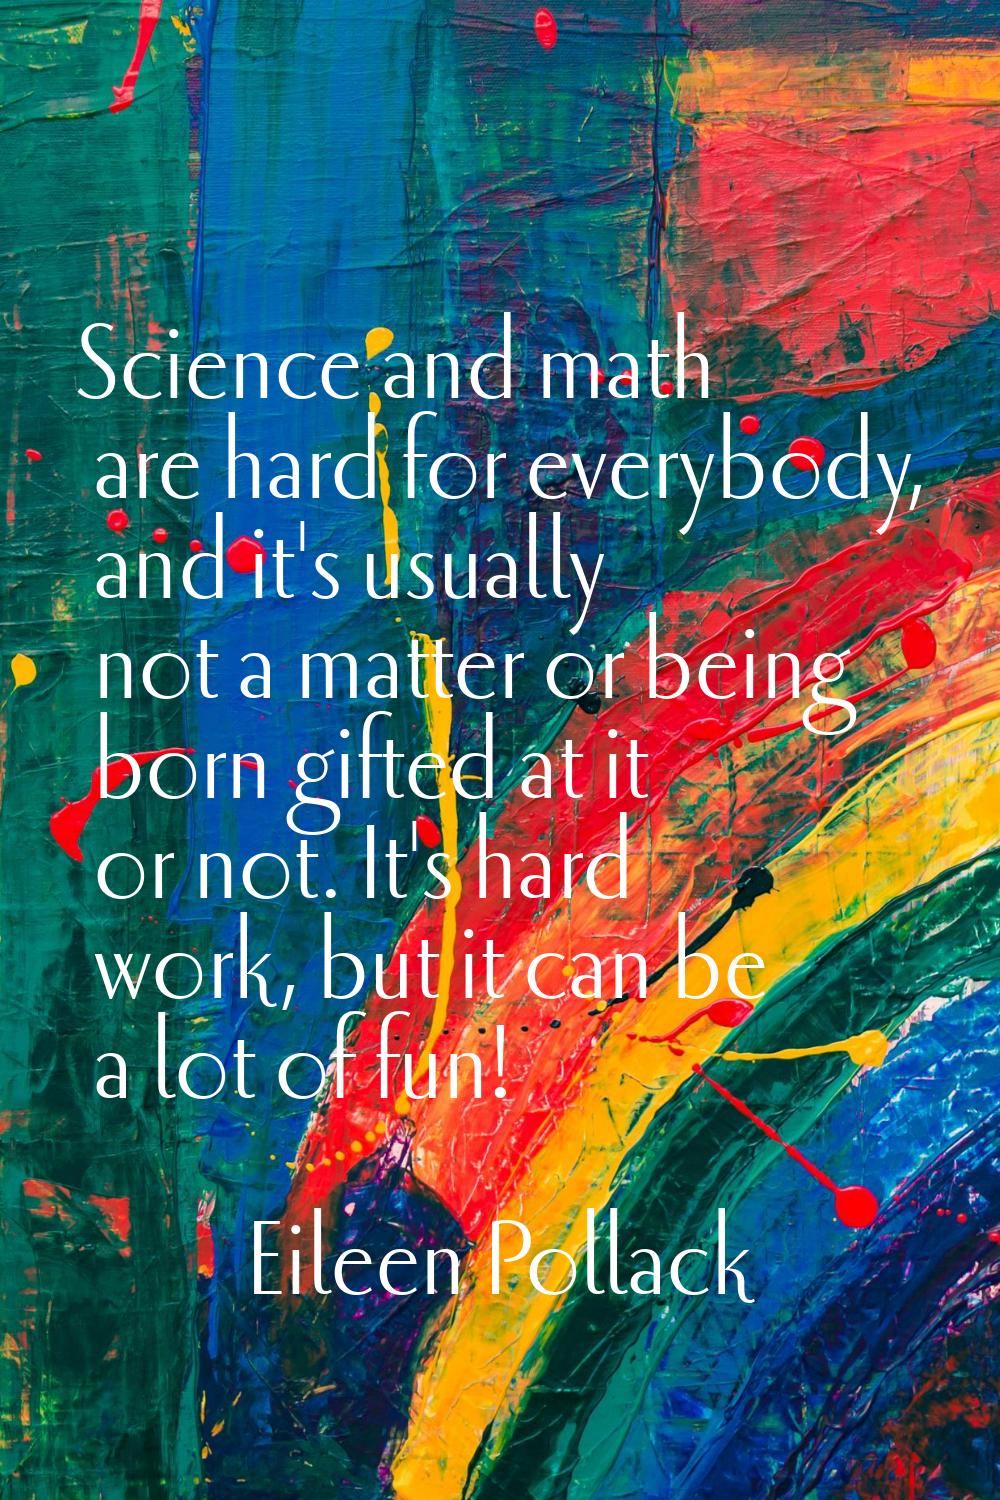 Science and math are hard for everybody, and it's usually not a matter or being born gifted at it o